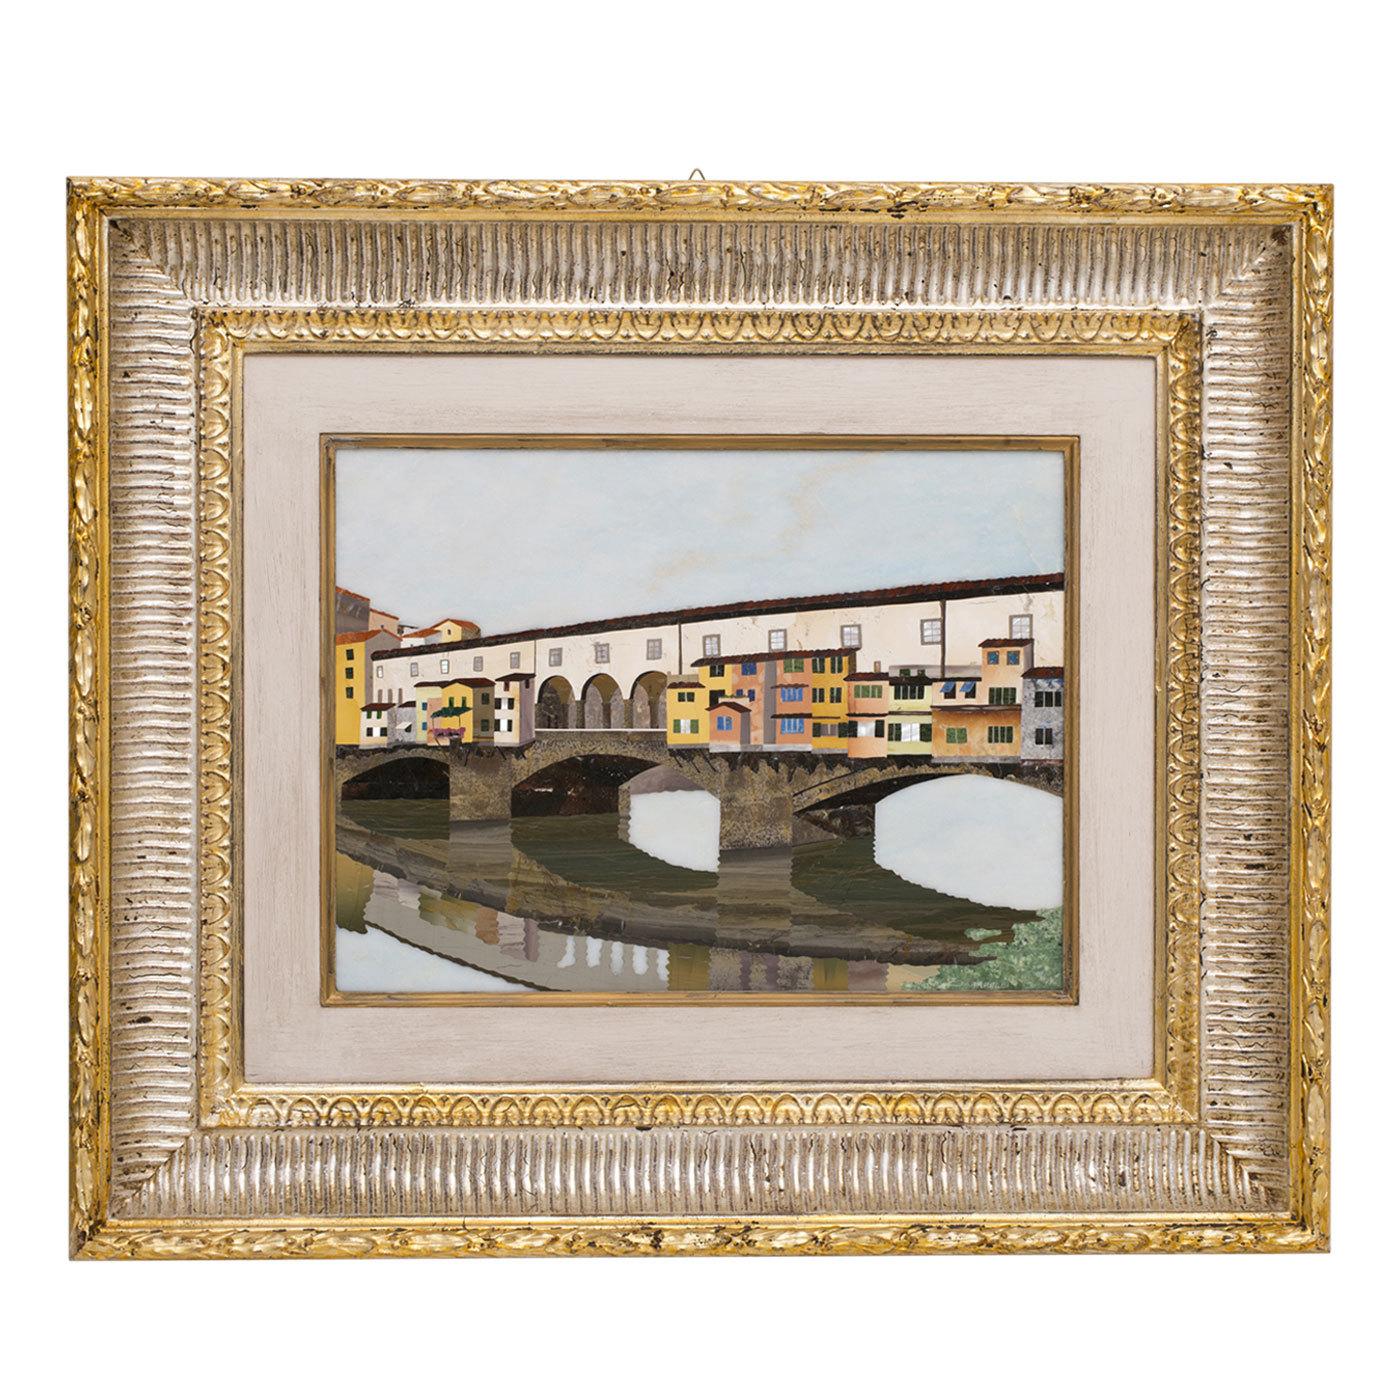 Bold grains of lapis lazuli, chalcedony, green Arno, and mother of pearl have been worked to depict the iconic Ponte Vecchio, a major landmark of Florence. The elegant design is employing Renaissance techniques as well as long days of patient work.